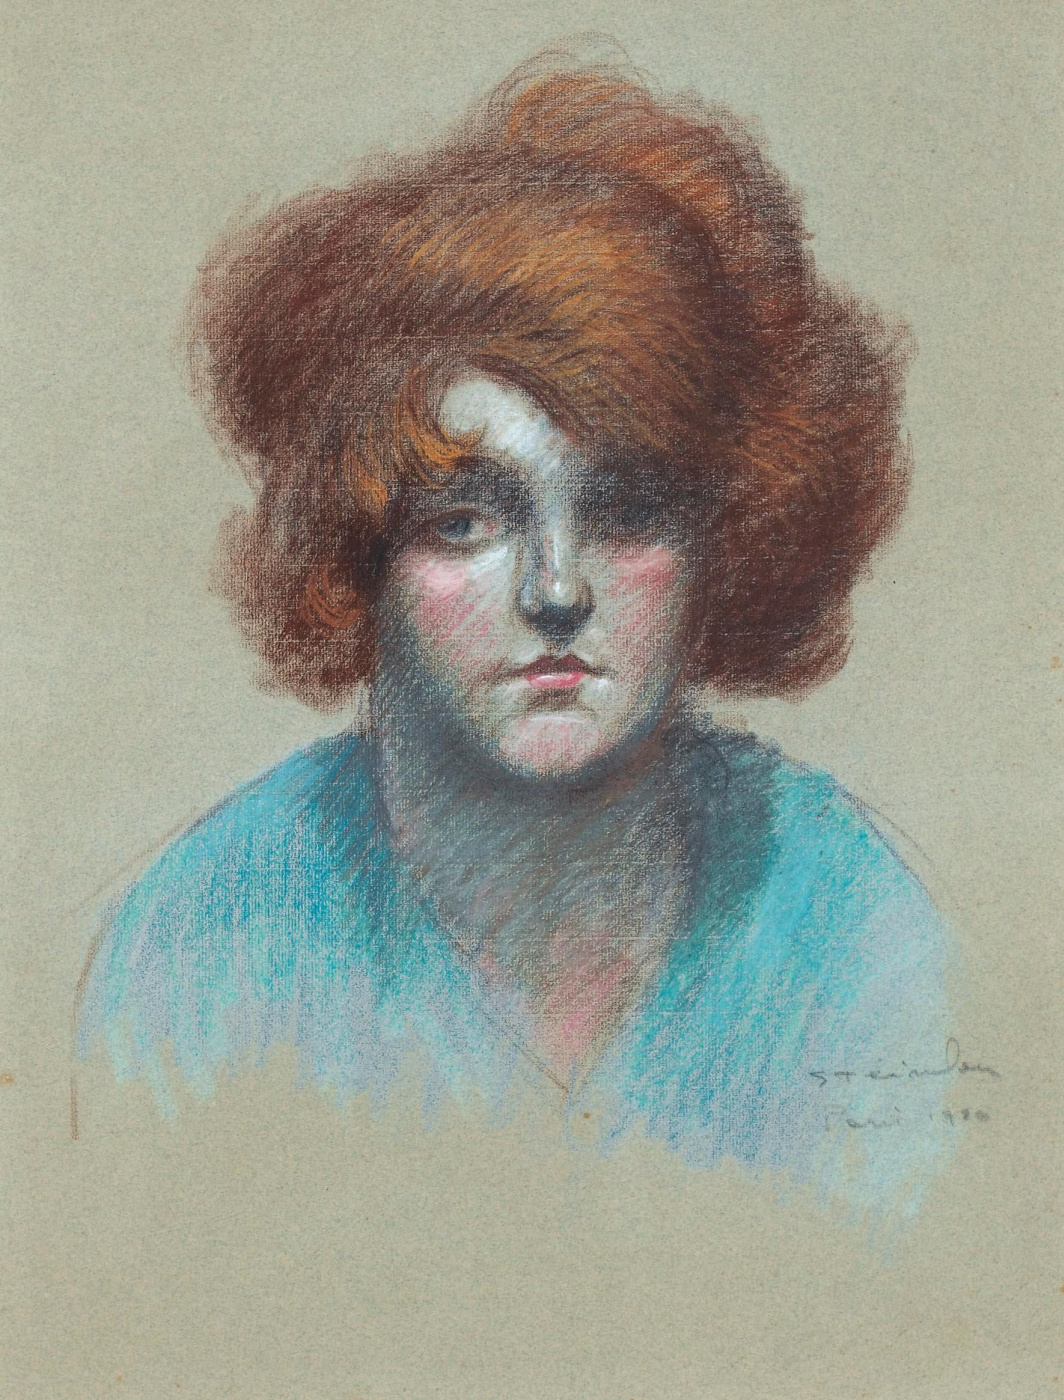 Theophile-Alexander Steinlen. Portrait of a girl in a blue blouse